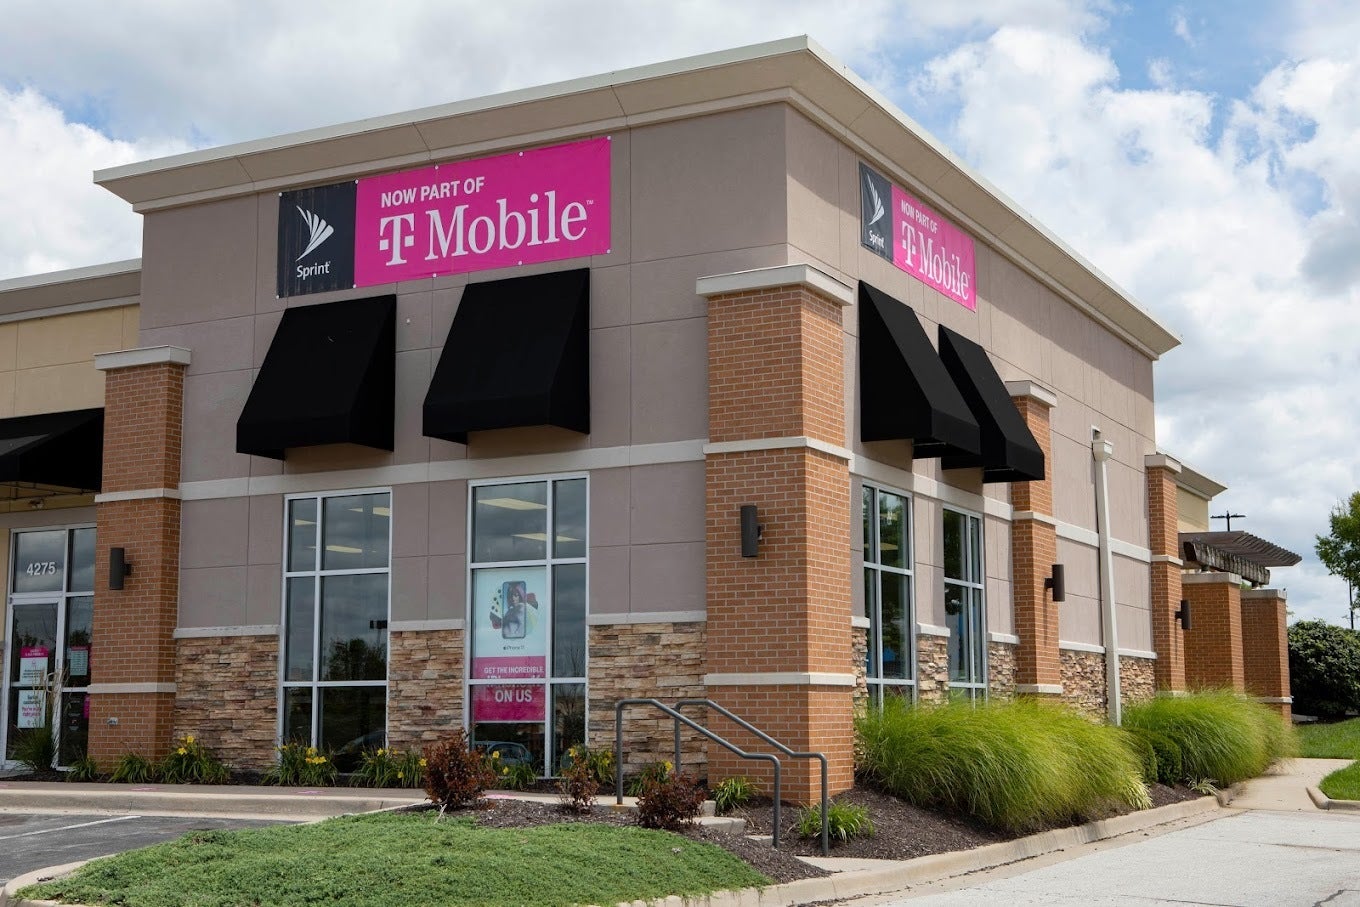 T-Mobile authorized retail location owned by Wireless Vision - T-Mobile angers dealers by making drastic changes to compensation